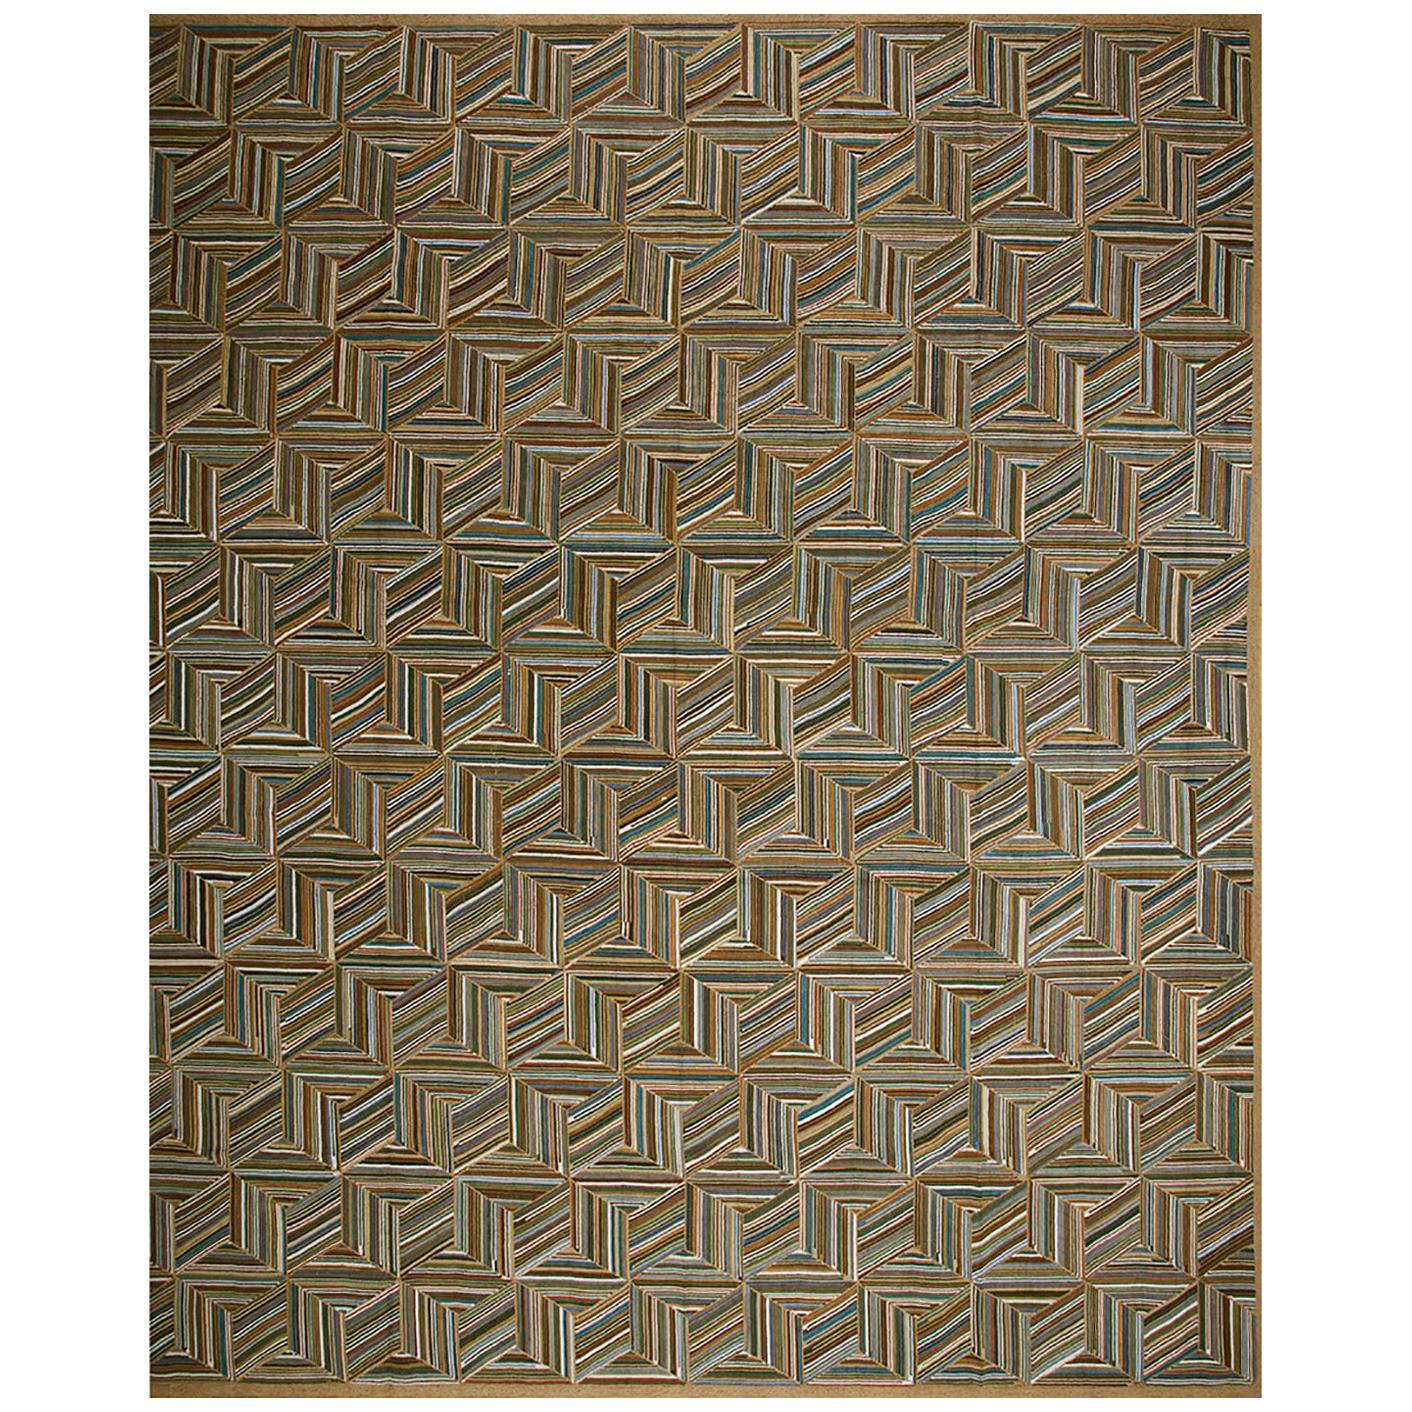 Contemporary American Hooked Rug (6' x 9' - 183x 274) For Sale